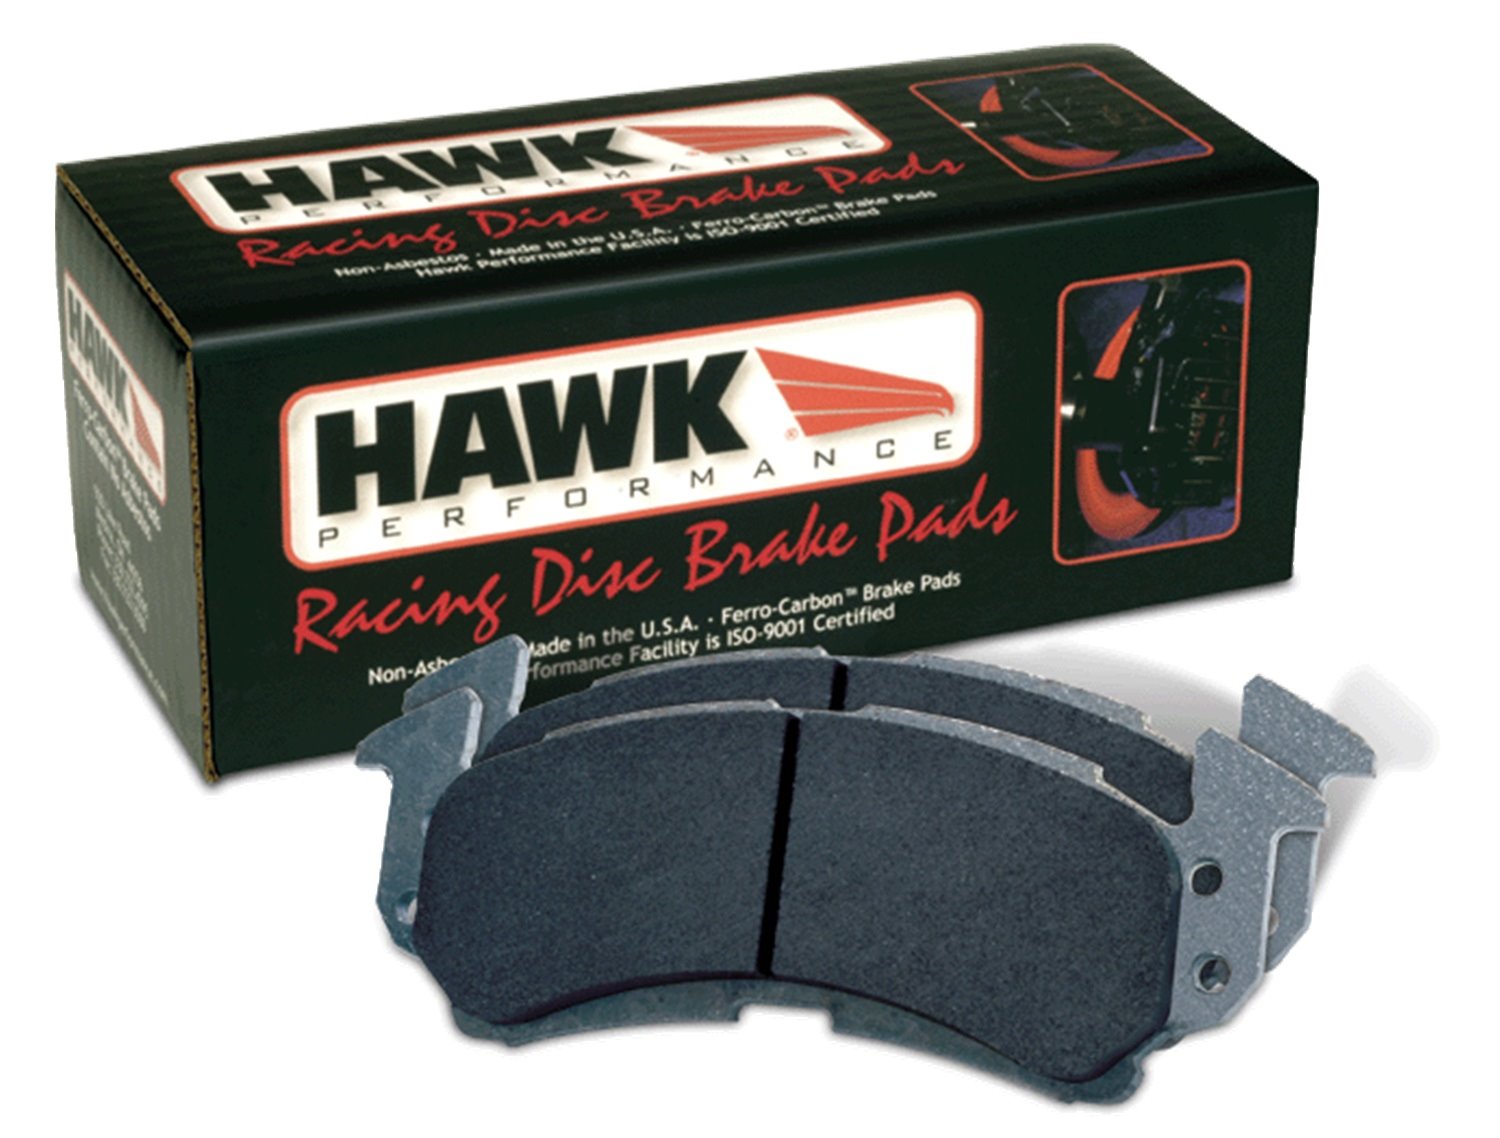 HP-Plus Performance Brake Pads for Cadillac ATS, CT6, CTS, XTS; Chevy Corvette - 0.590 Thickness